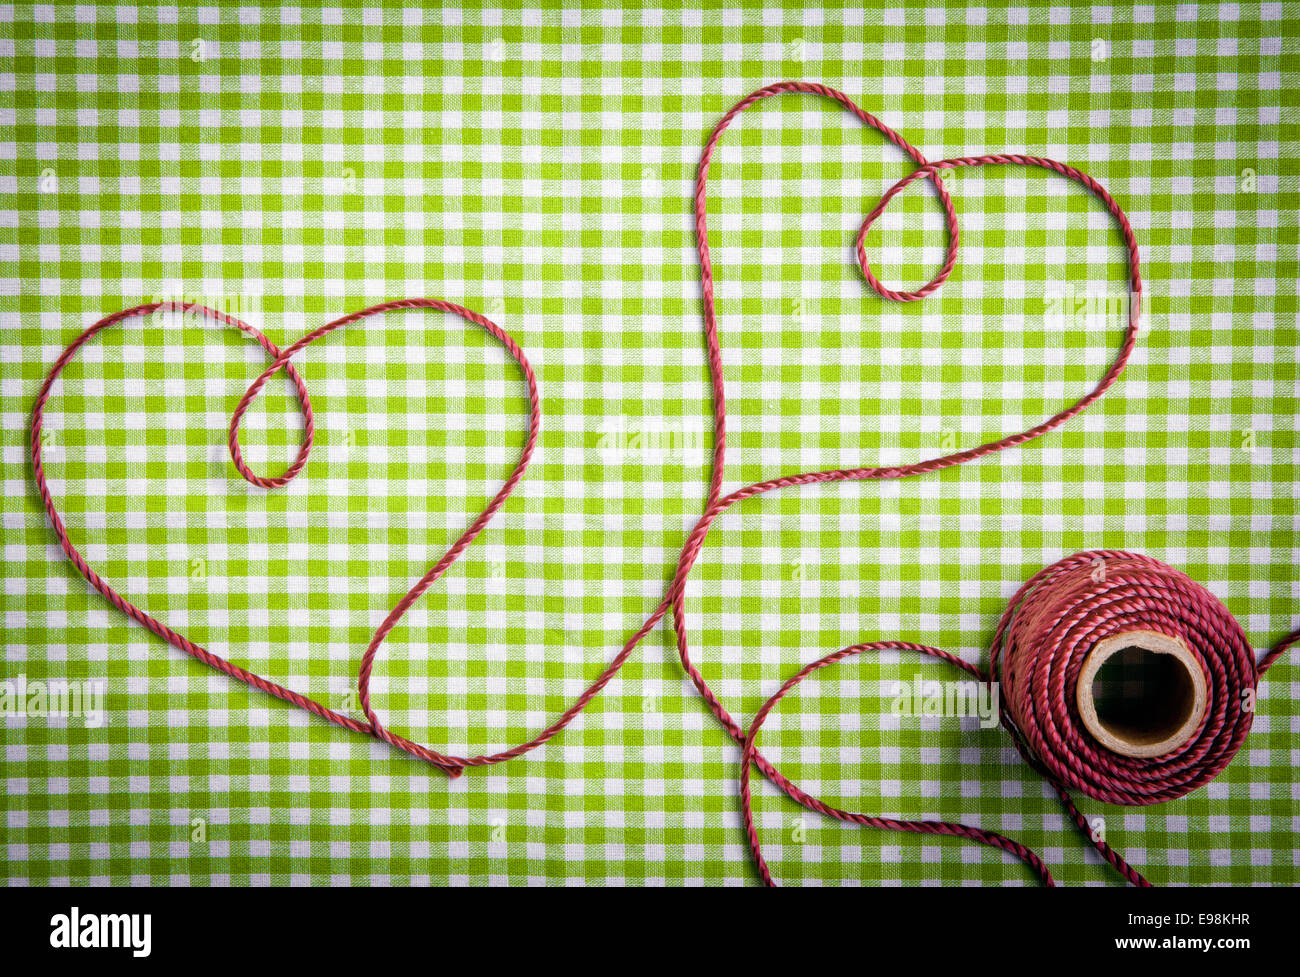 Hearts drawn with purple thread through a tag over a checkered fabric pattern Stock Photo